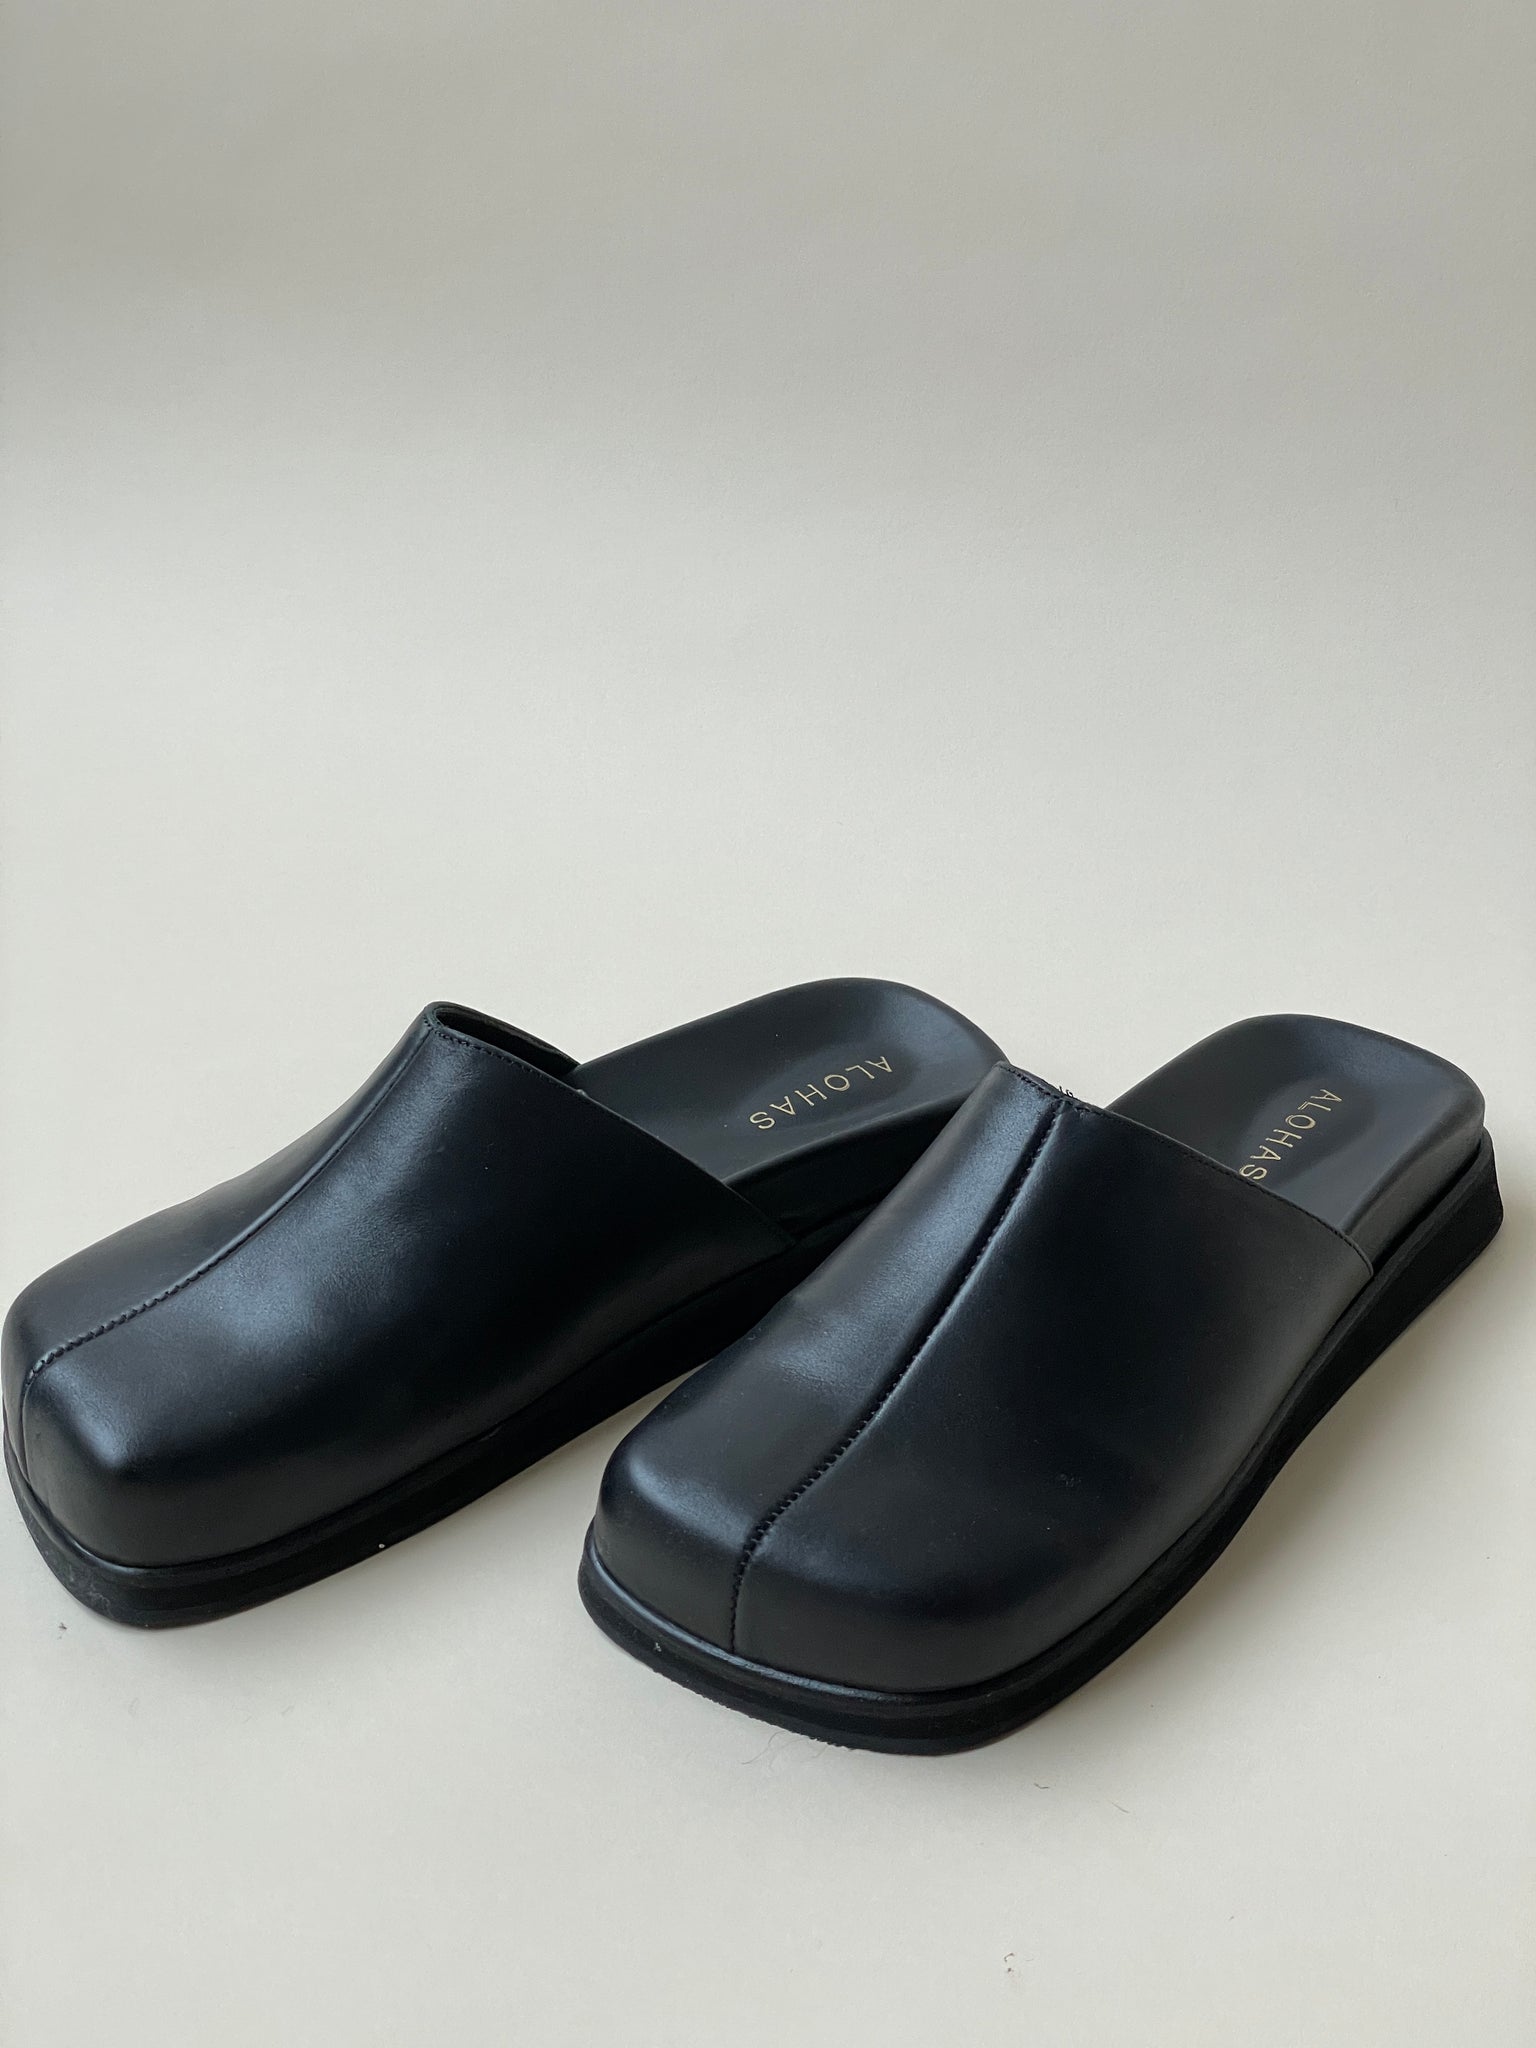 The Square Toe Clog – Ivin March